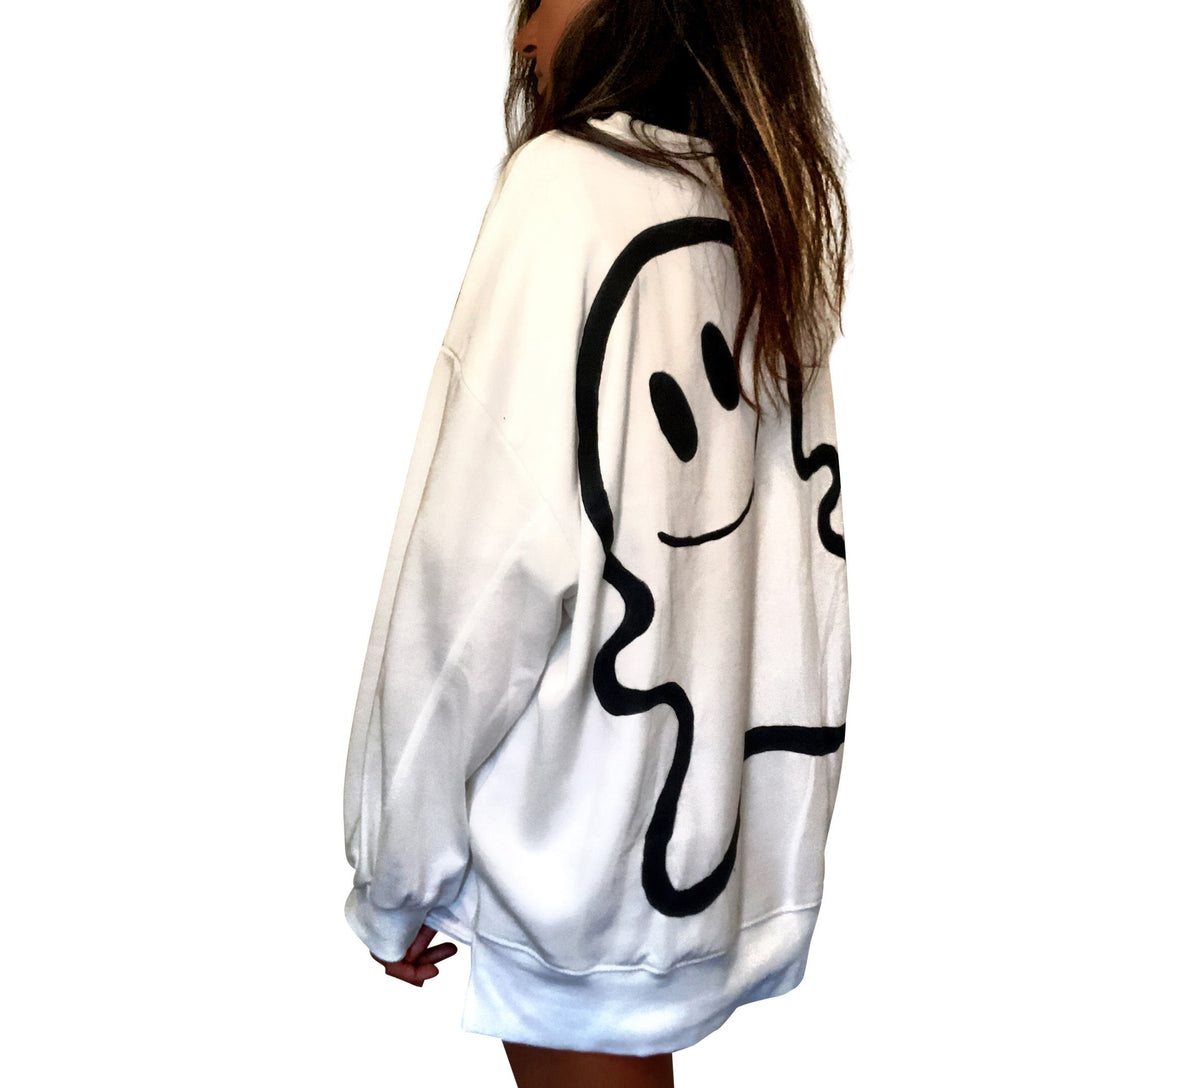 Oversized white sweatshirt. Silhouette of ghost painted in black on back, with BOO painted on front upper side. Signed @wrenandglory.